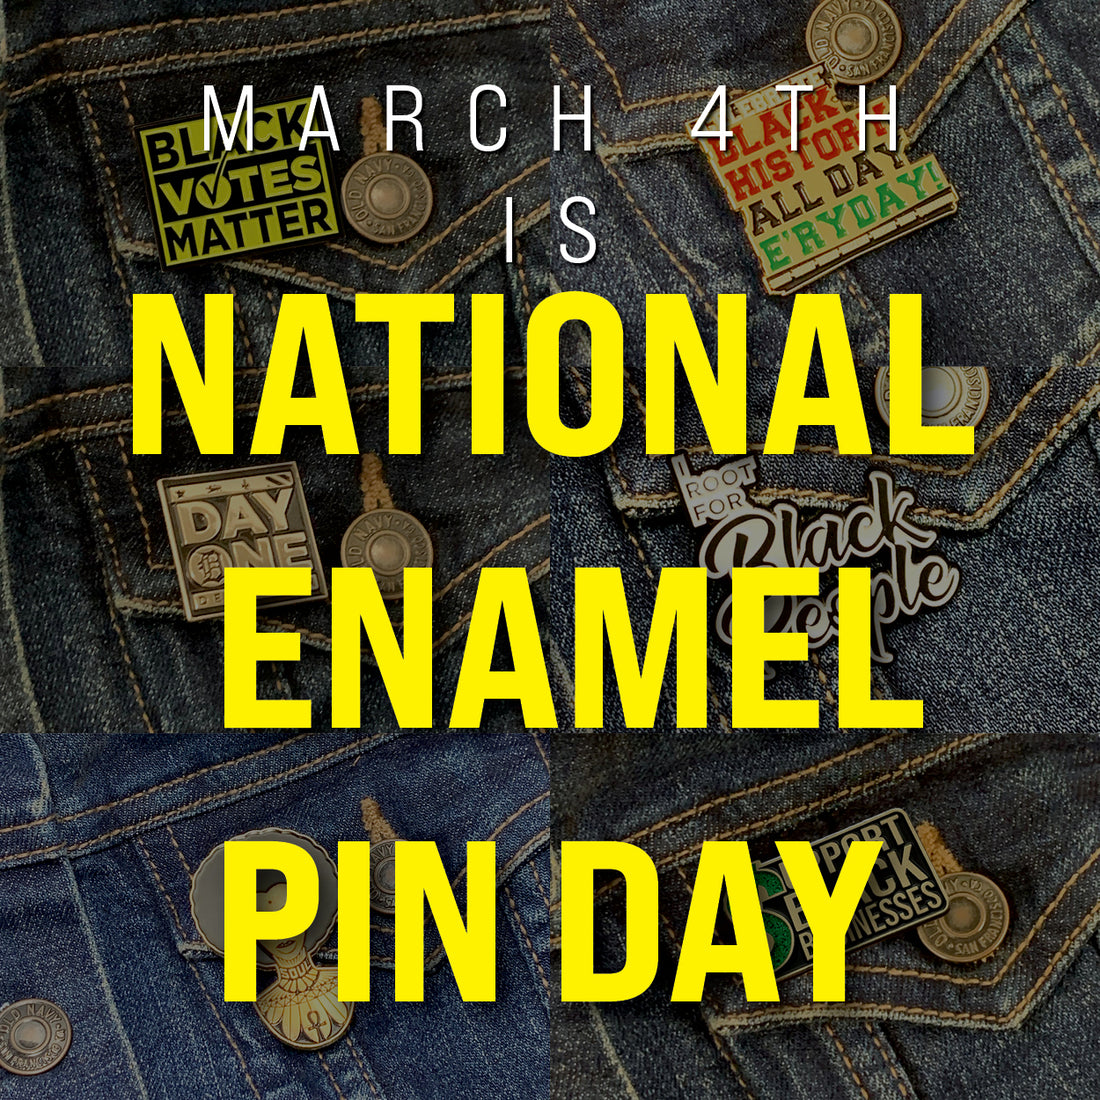 National Enamel Pin Day is here!